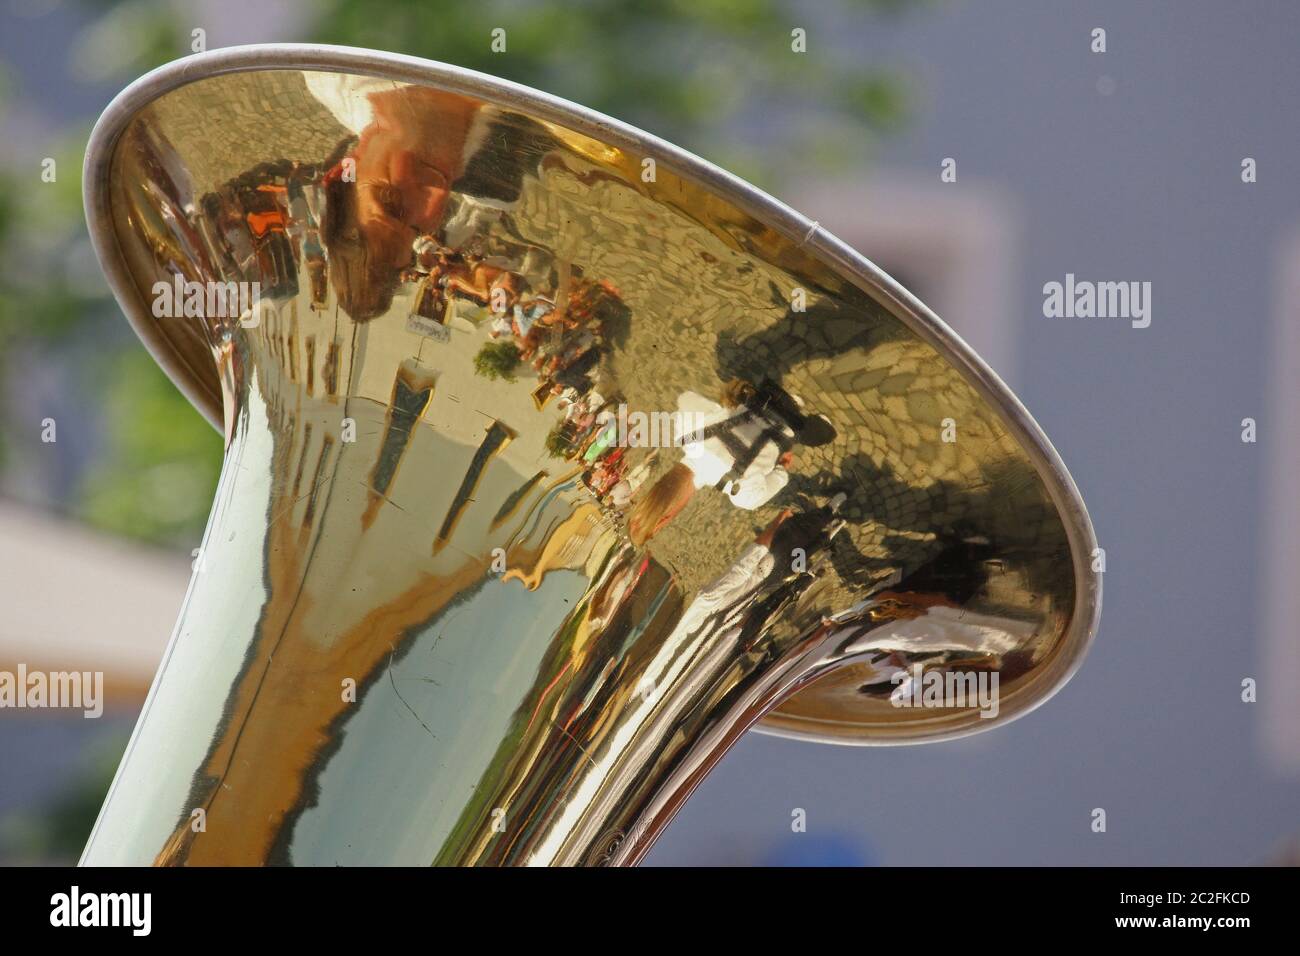 Musician of a brass band Stock Photo